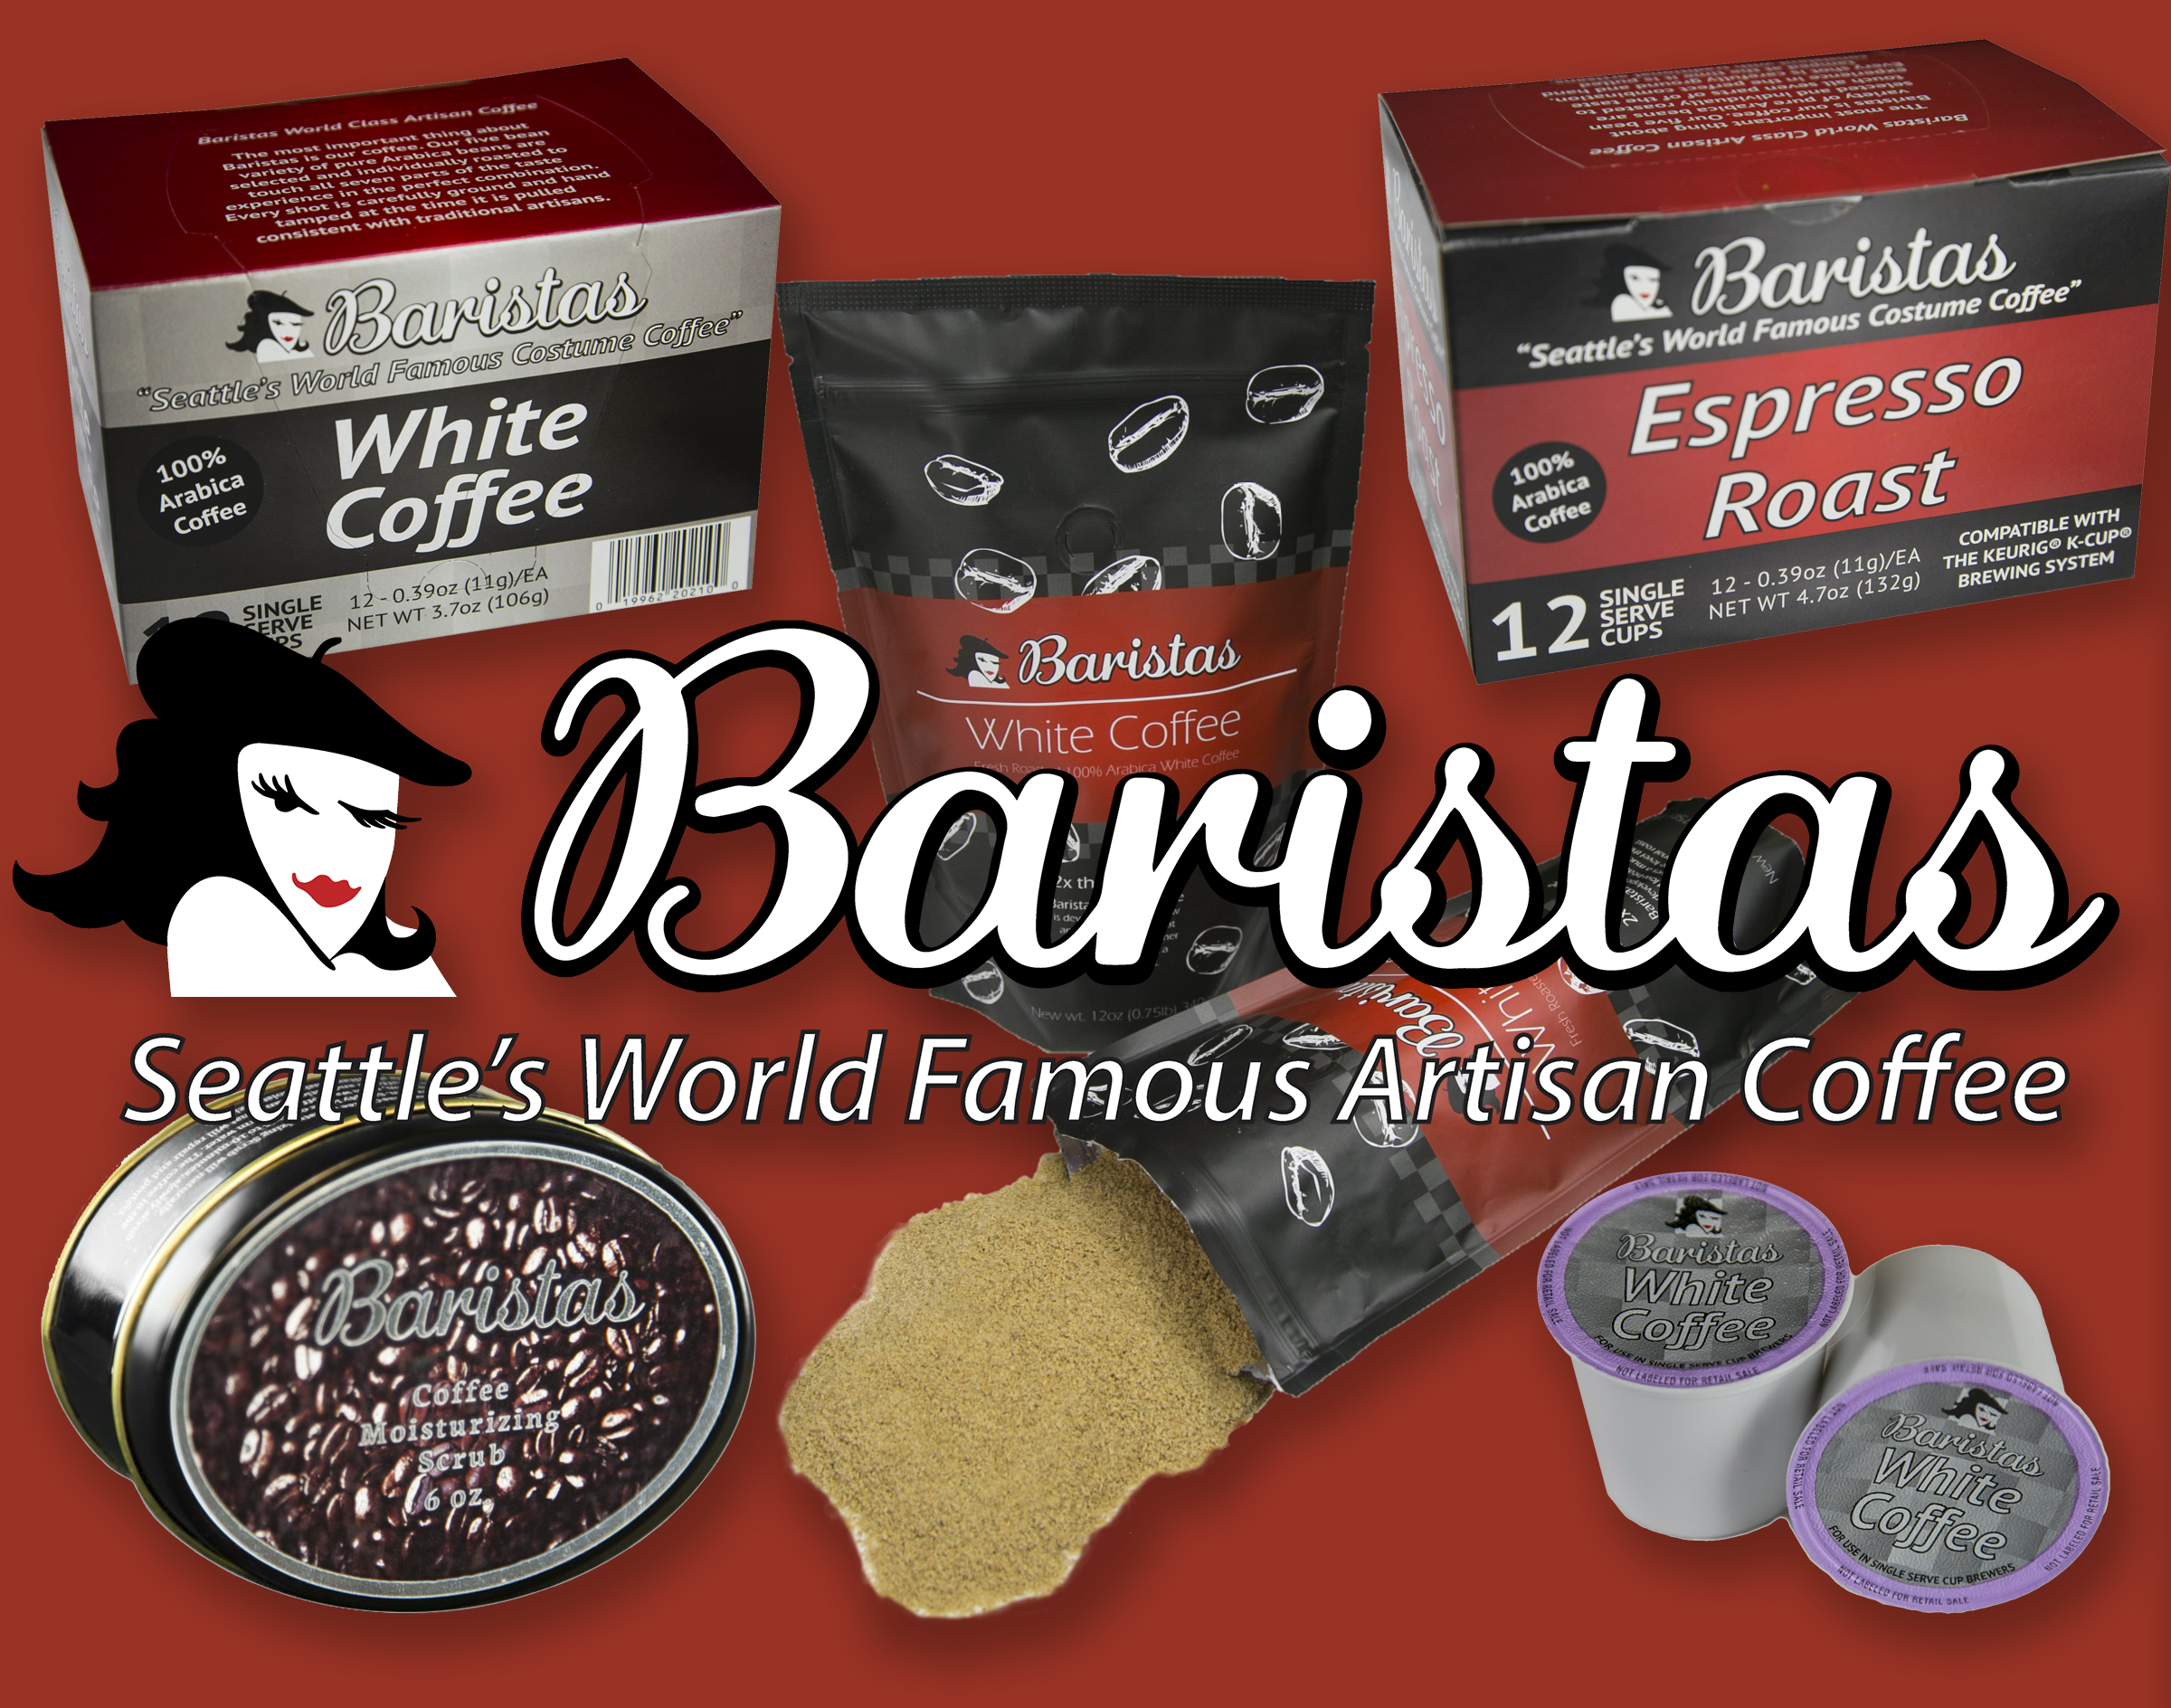 https://www.accesswire.com/users/newswire/images/559088/baristas-Whiteand-BlackColor.png